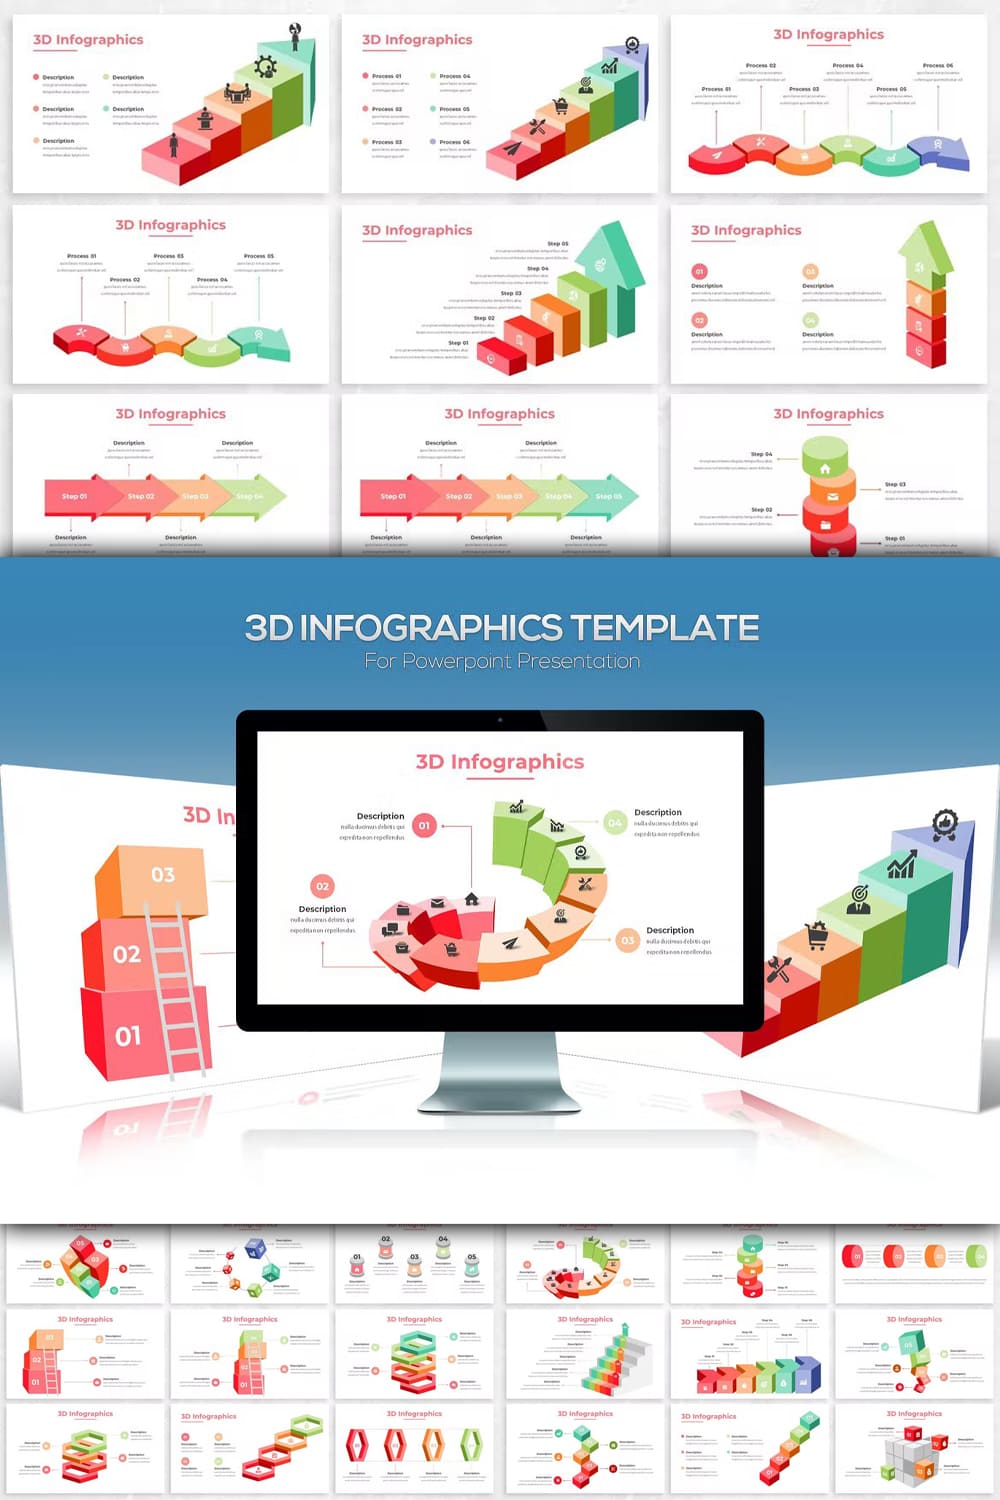 3d infographics for powerpoint presentation - pinterest image preview.